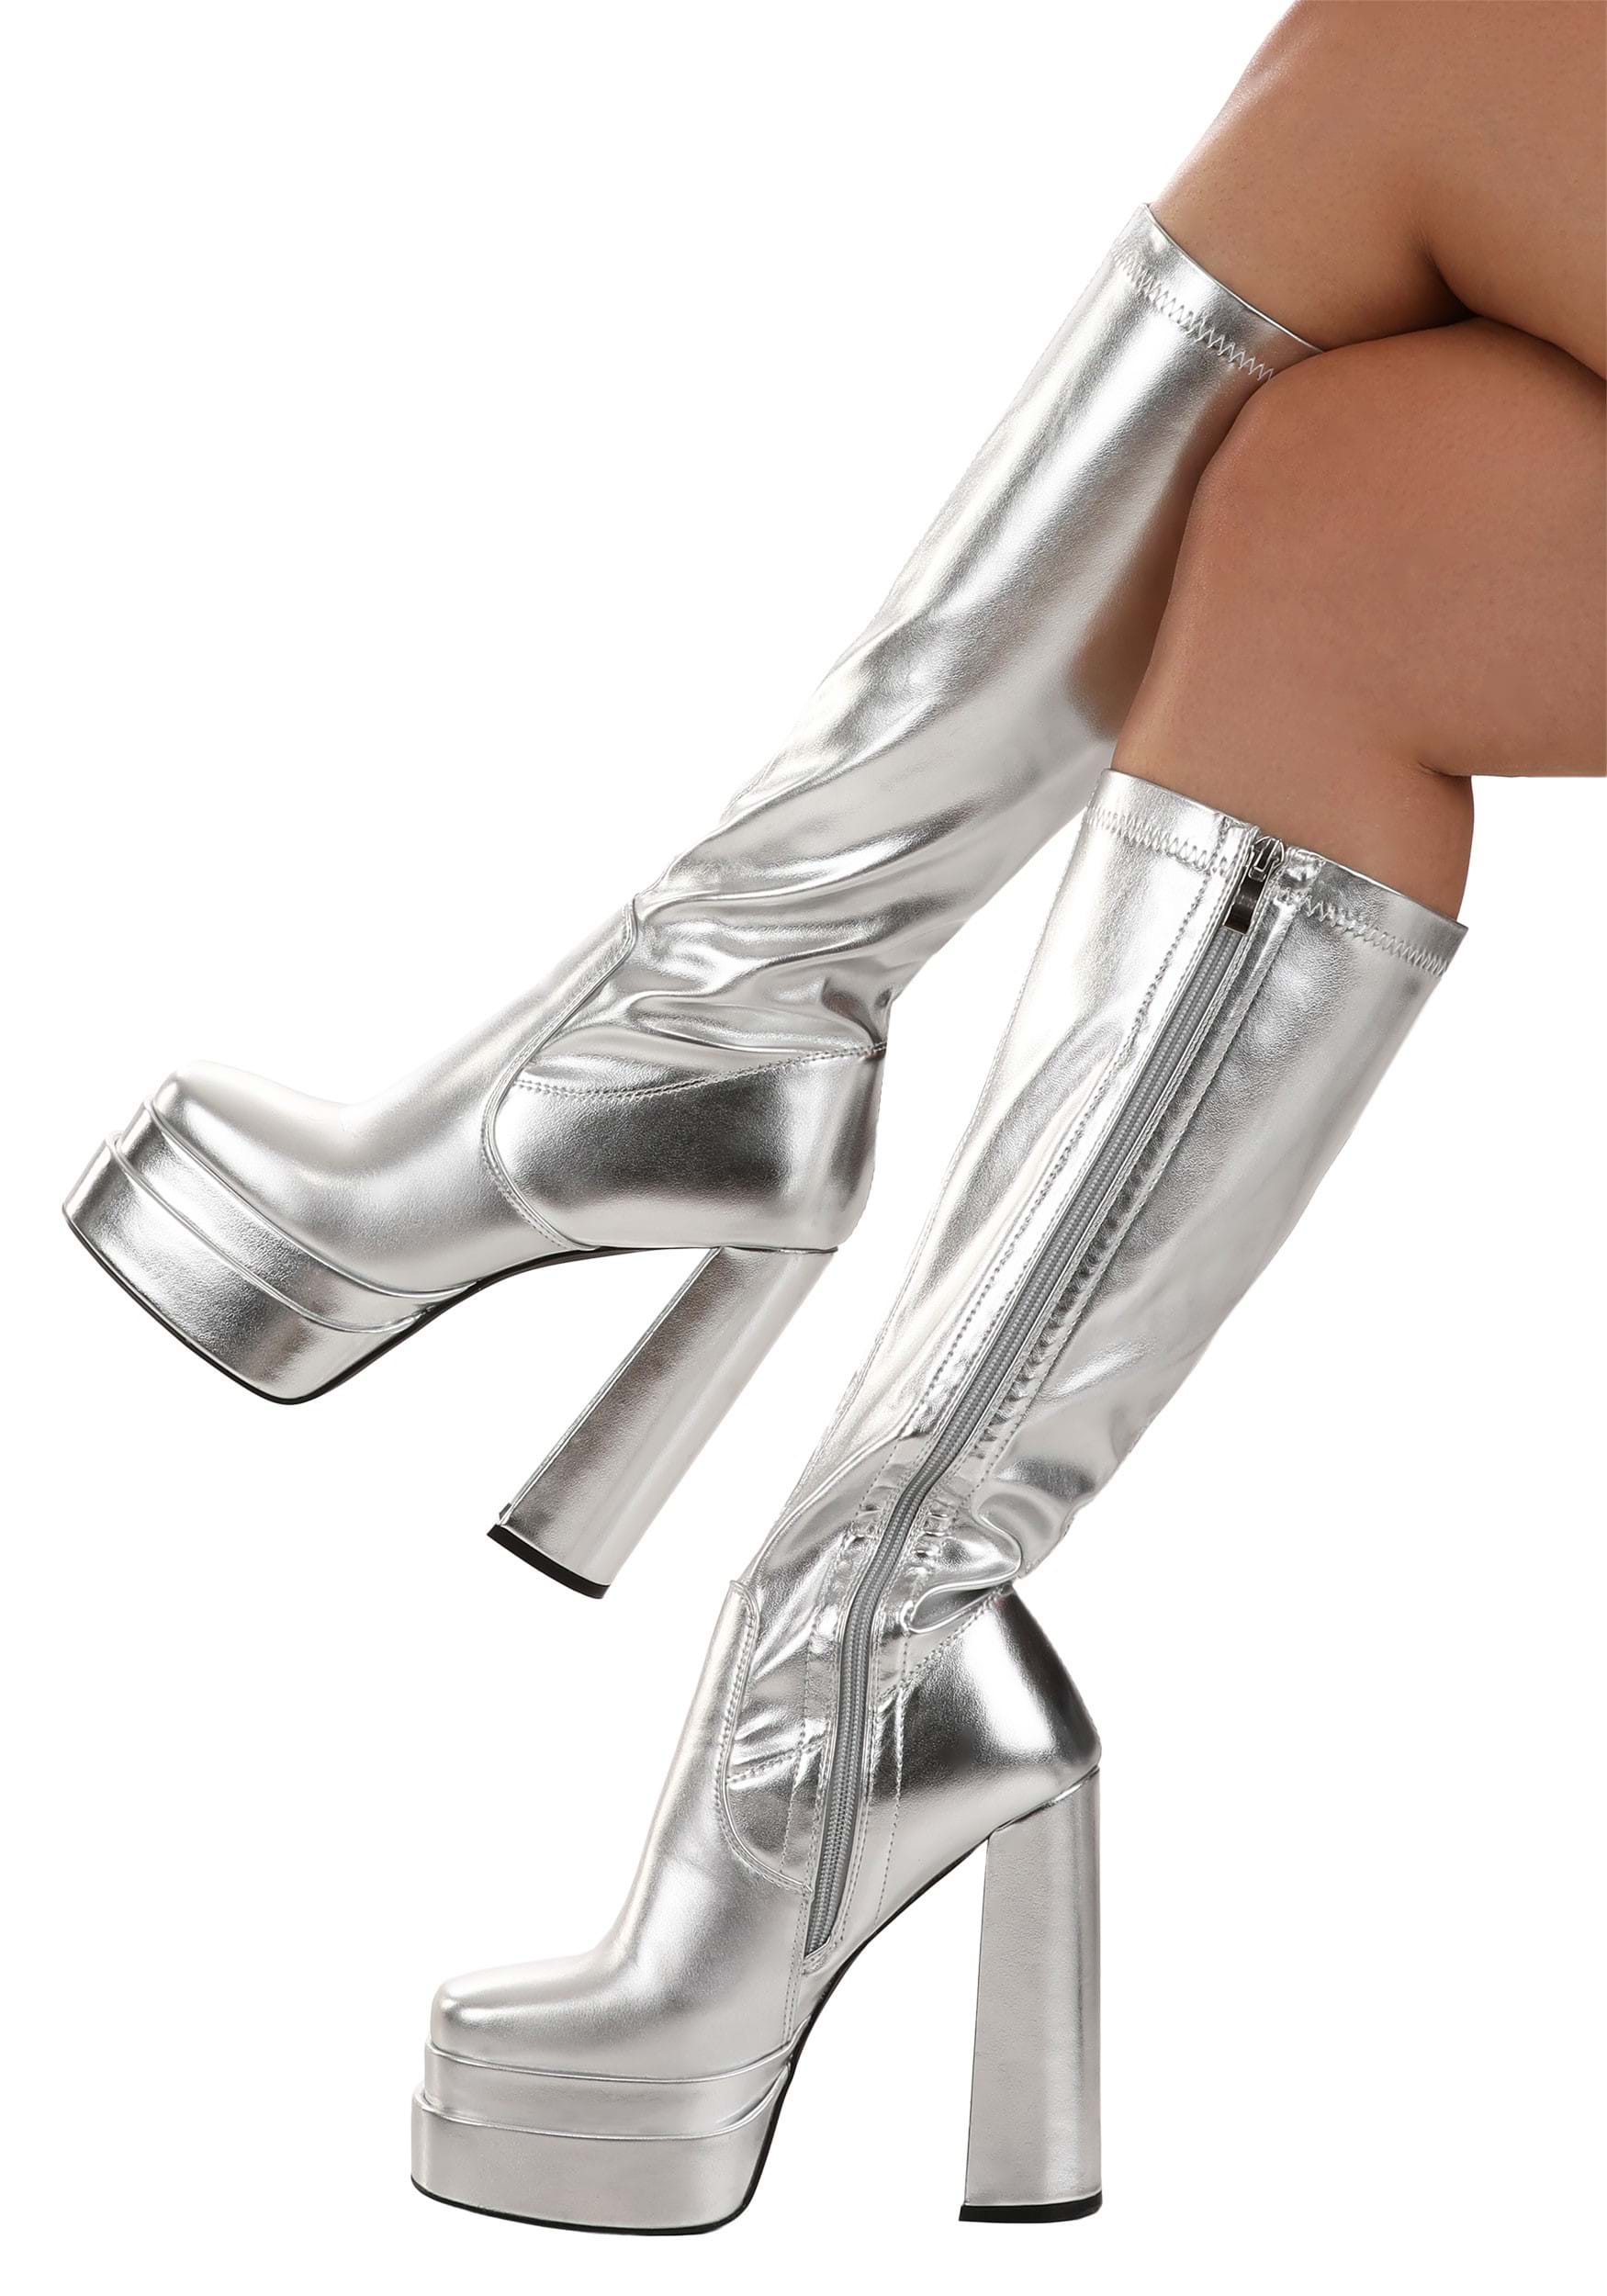 Deluxe Women's Silver Gogo Boots